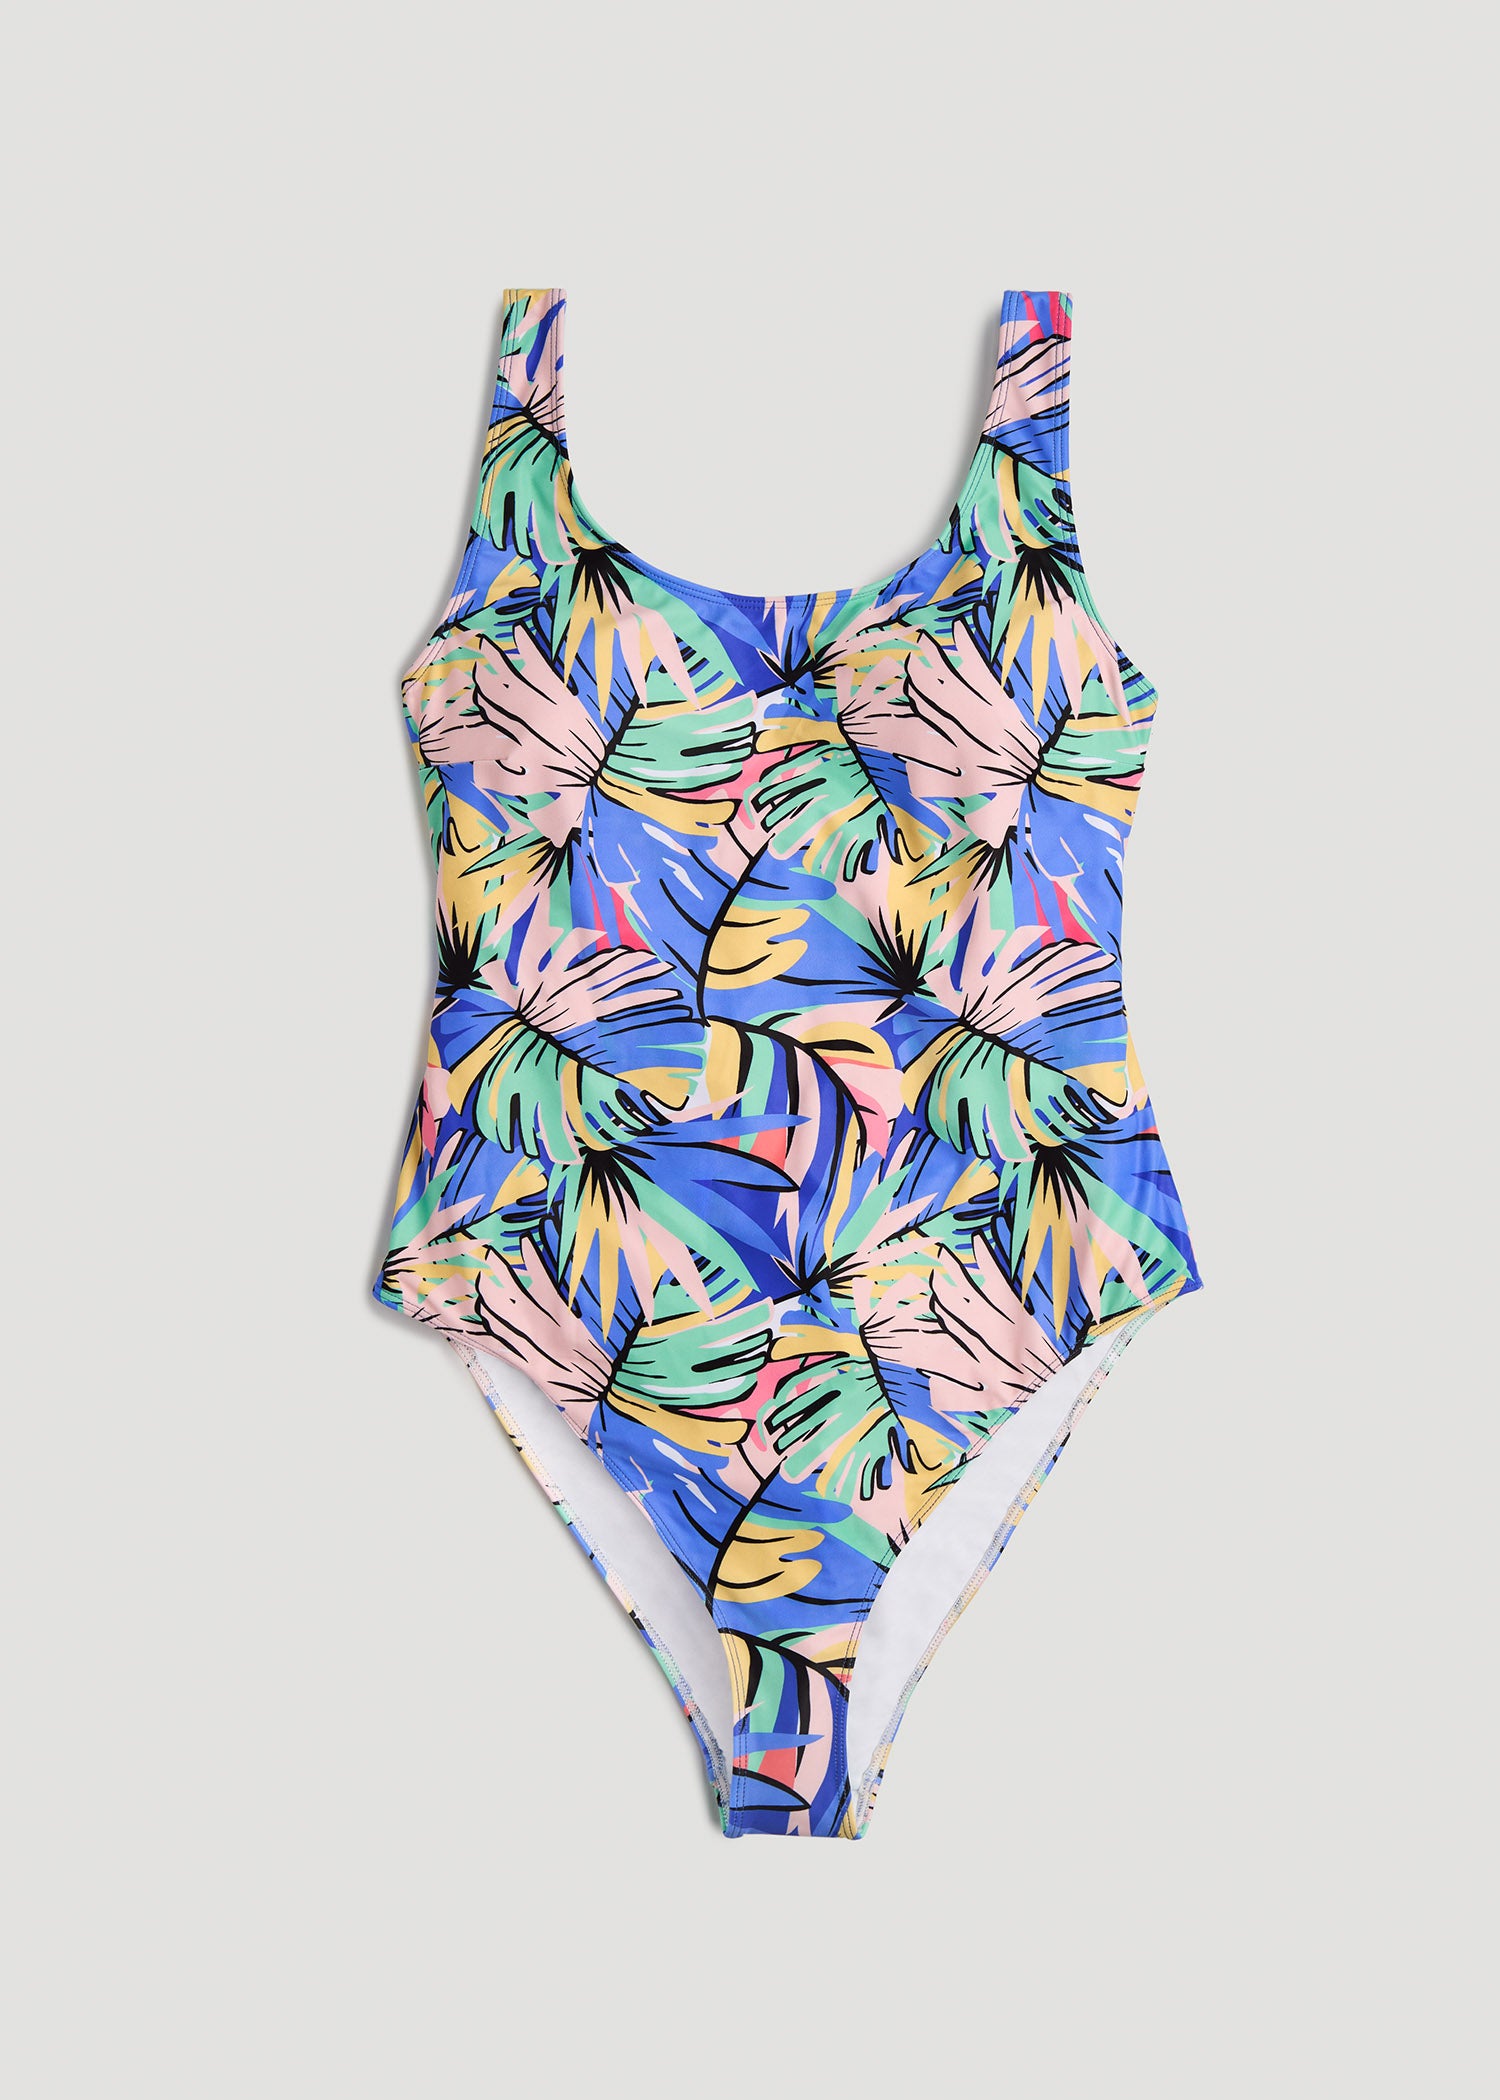 Women's Artesands One-Piece Swimsuits / One Piece Bathing Suit - up to −49%